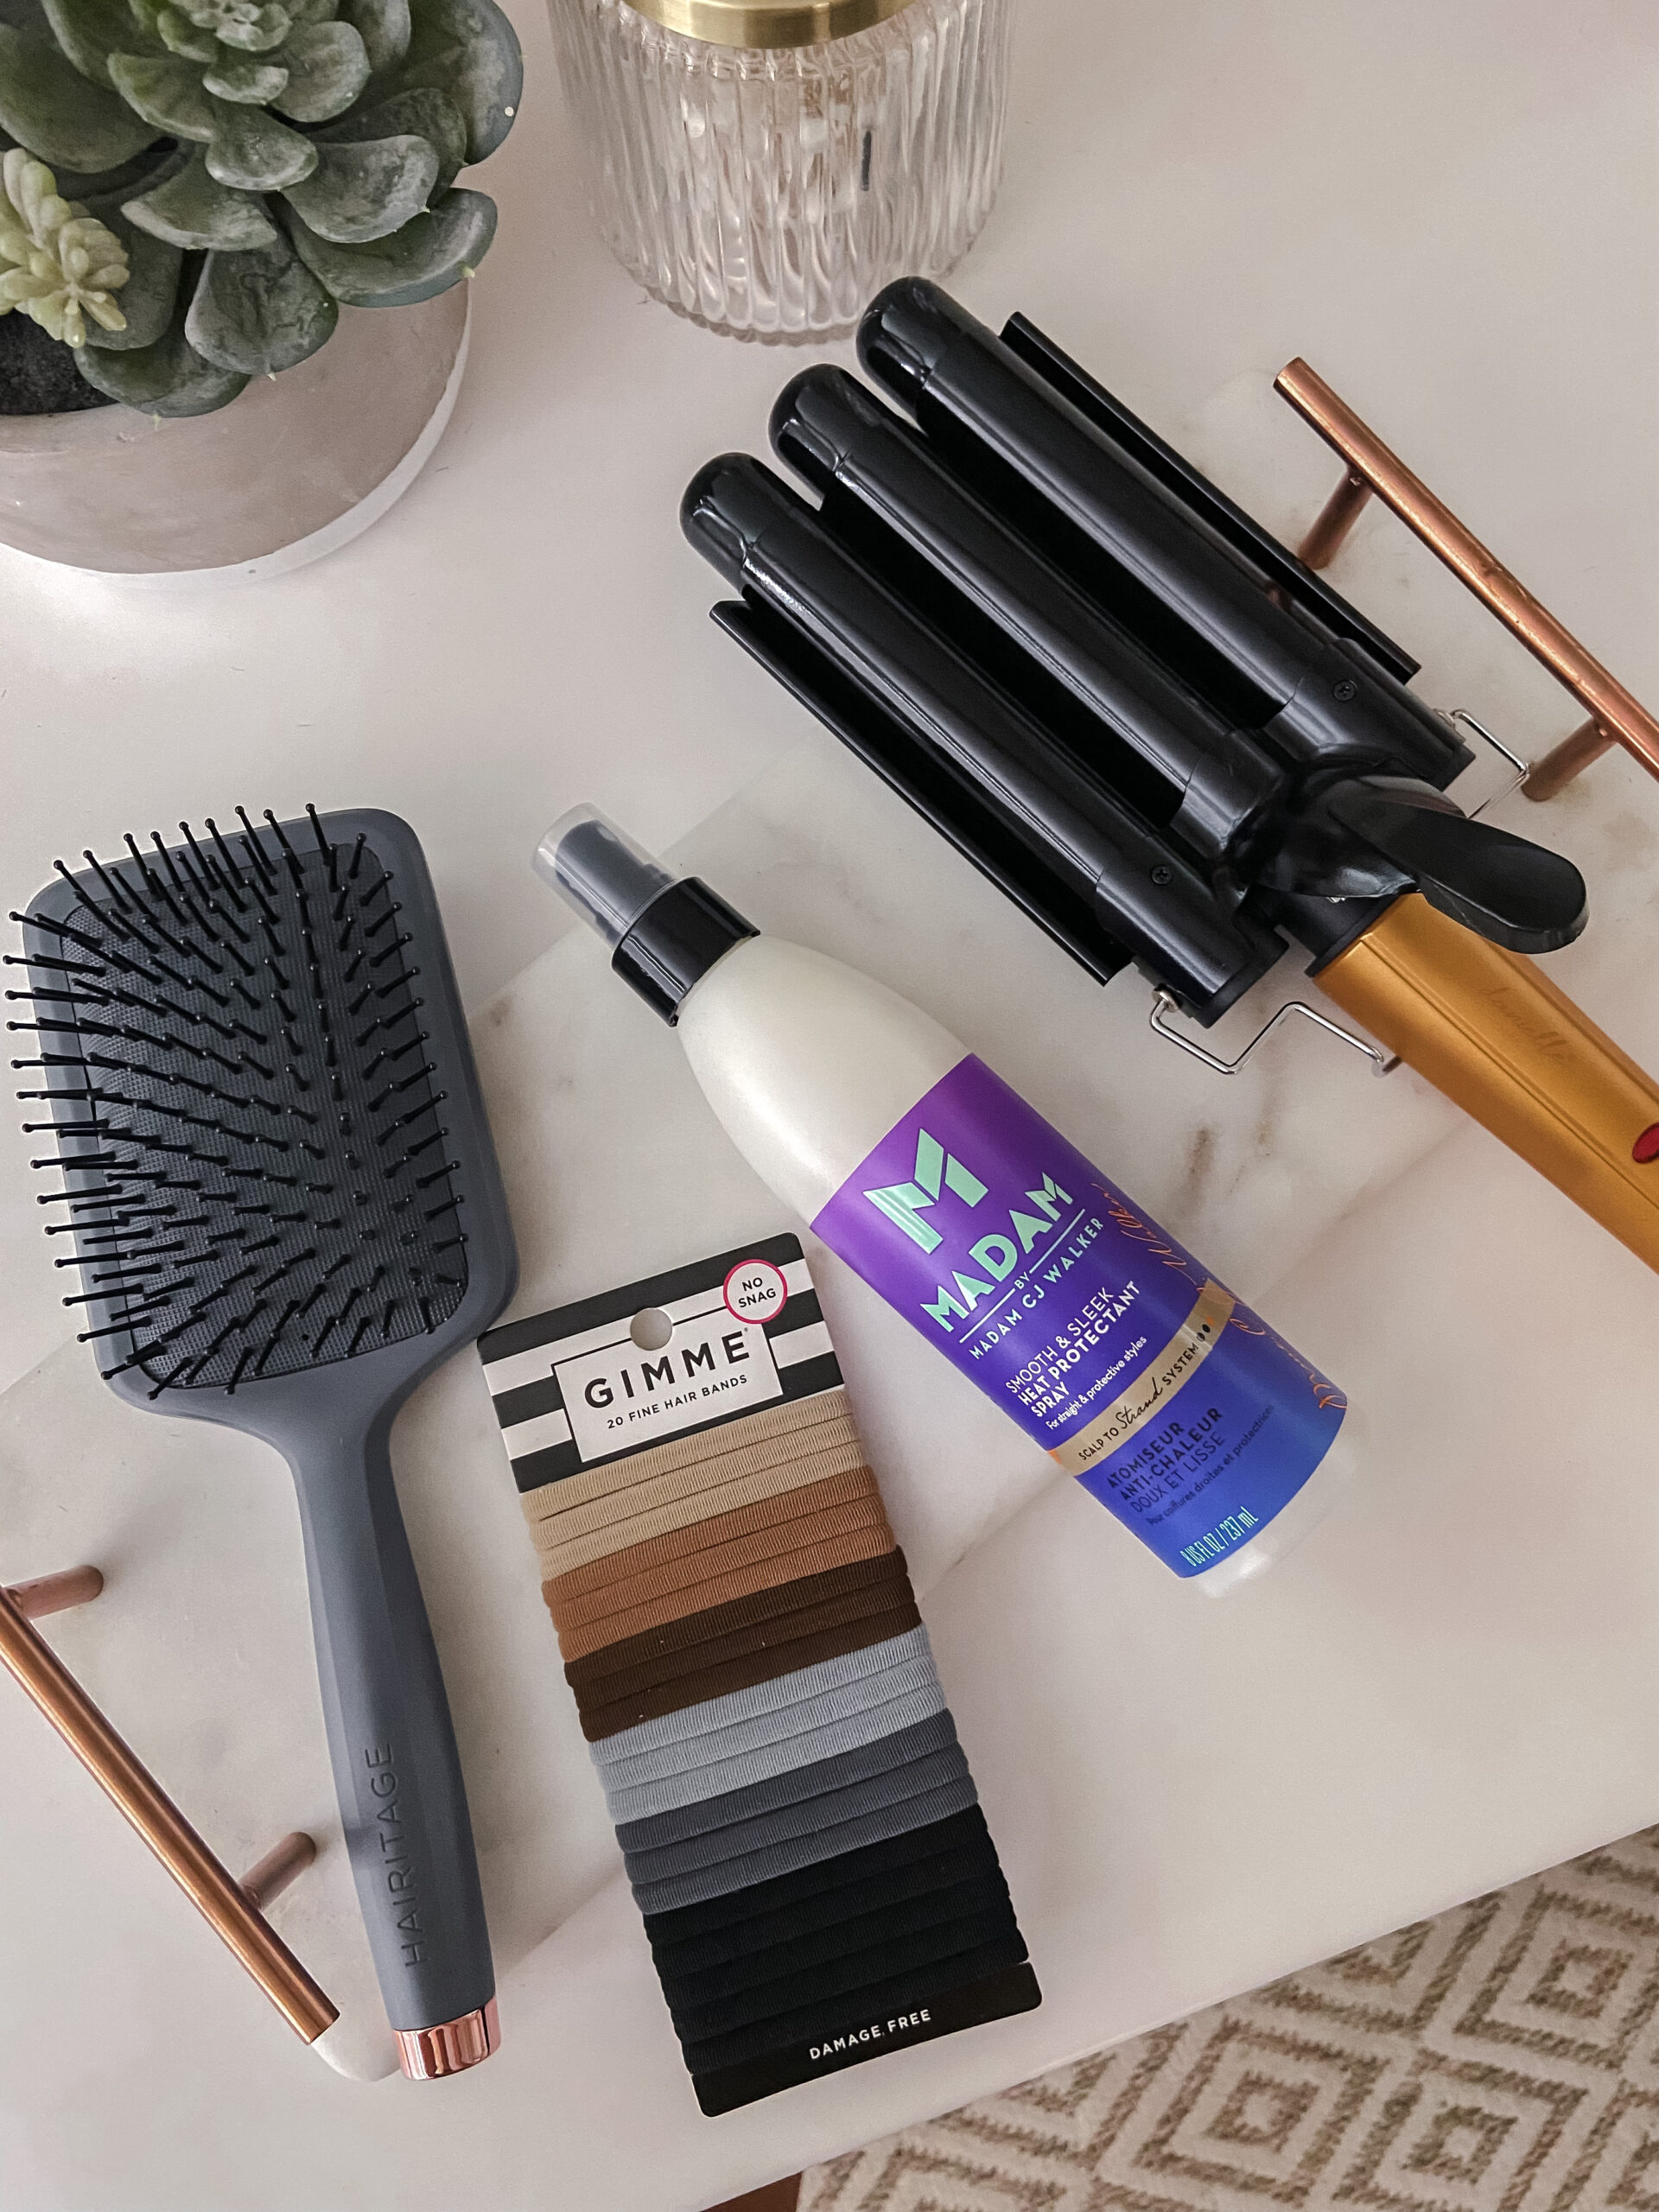 SUMMER HAIR REFRESH WITH WALMART-Jaclyn De Leon Style. Hair waver from Walmart creates fun and easy beach waves in minutes. Super affordable hair waver for fun hairstyles from Walmart.